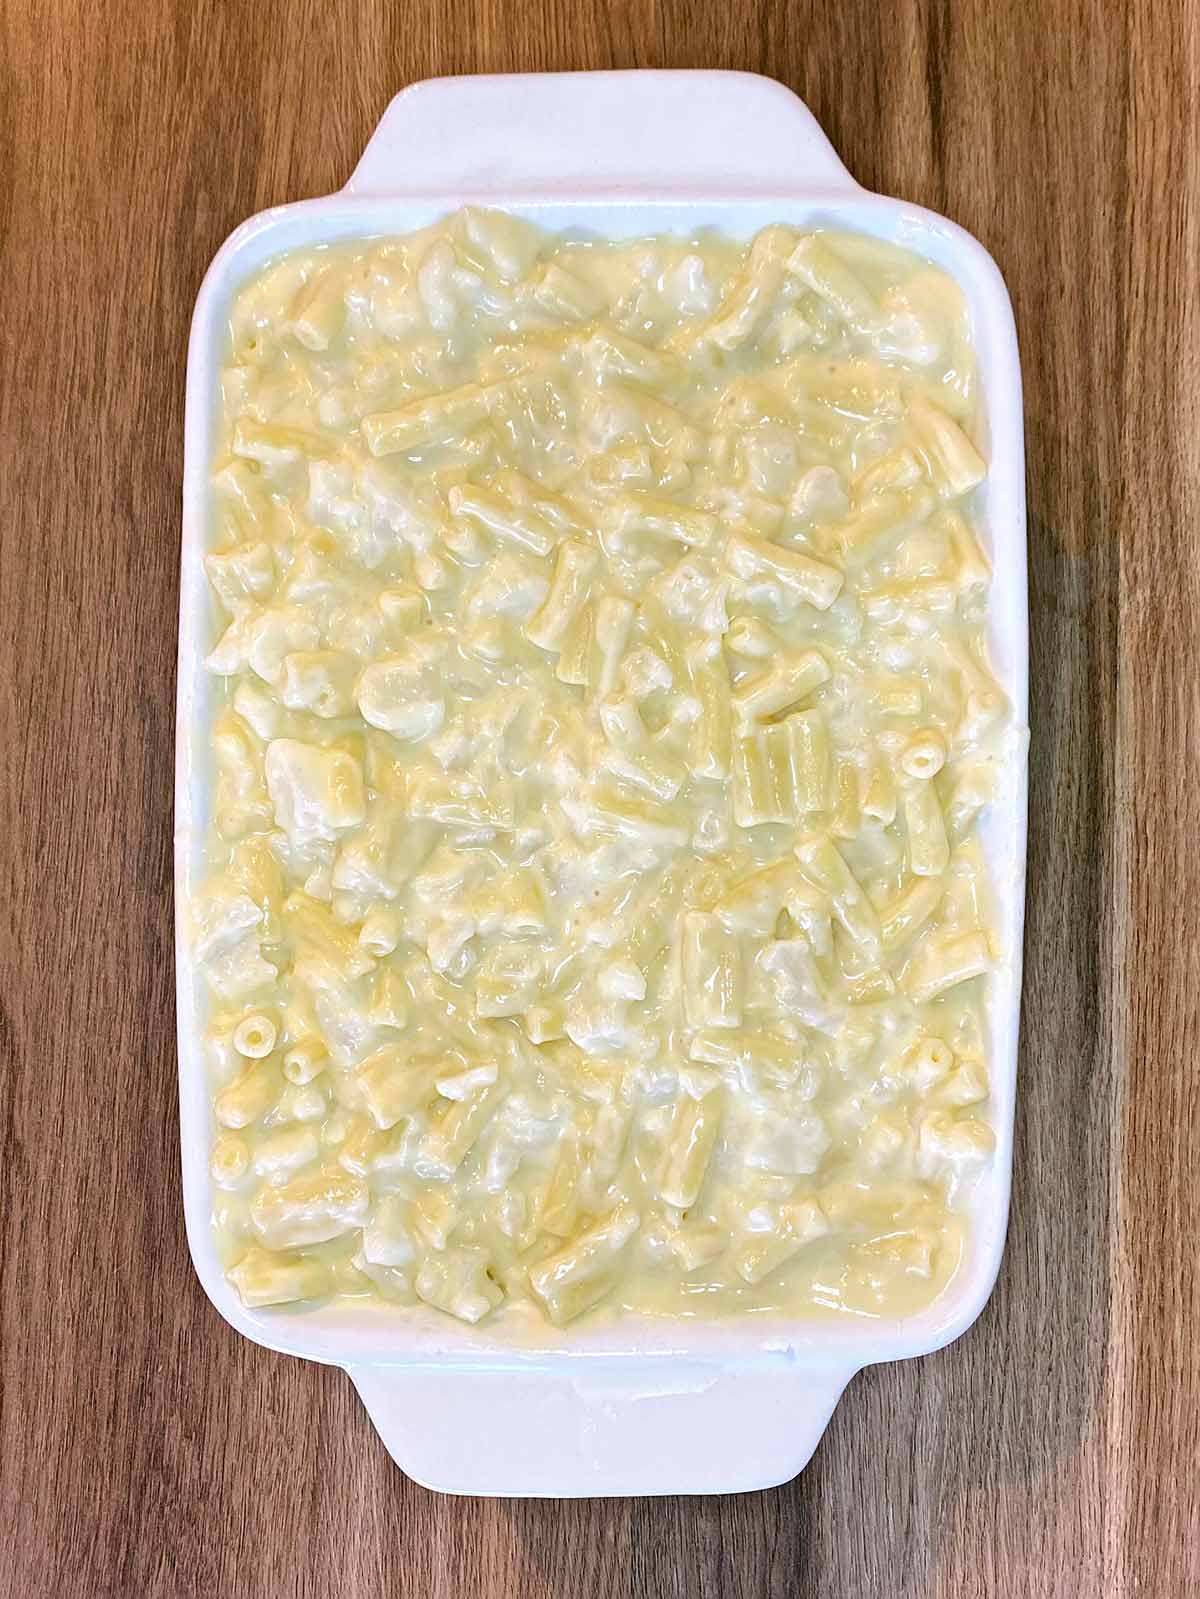 Cheese sauce added to the baking dish.